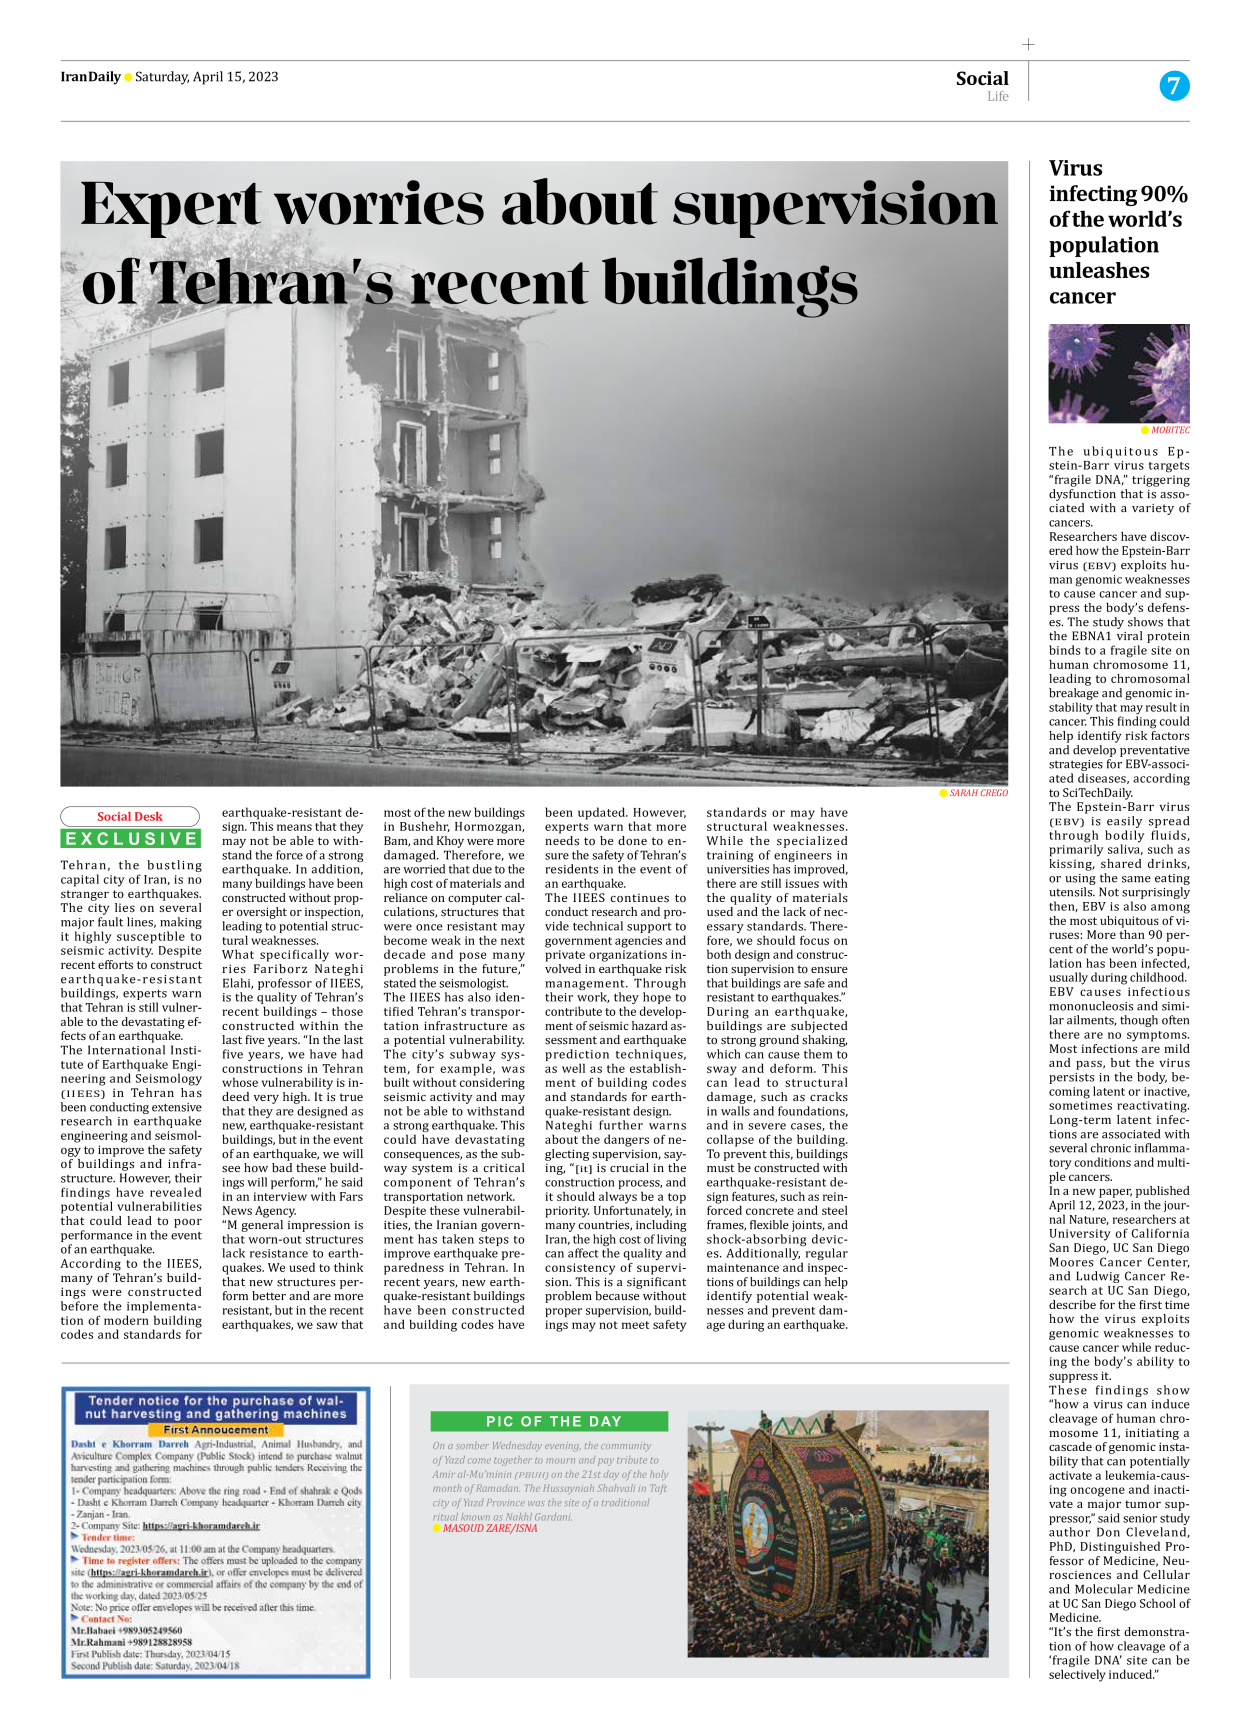 Iran Daily - Number Seven Thousand Two Hundred and Sixty Eight - 15 April 2023 - Page 7